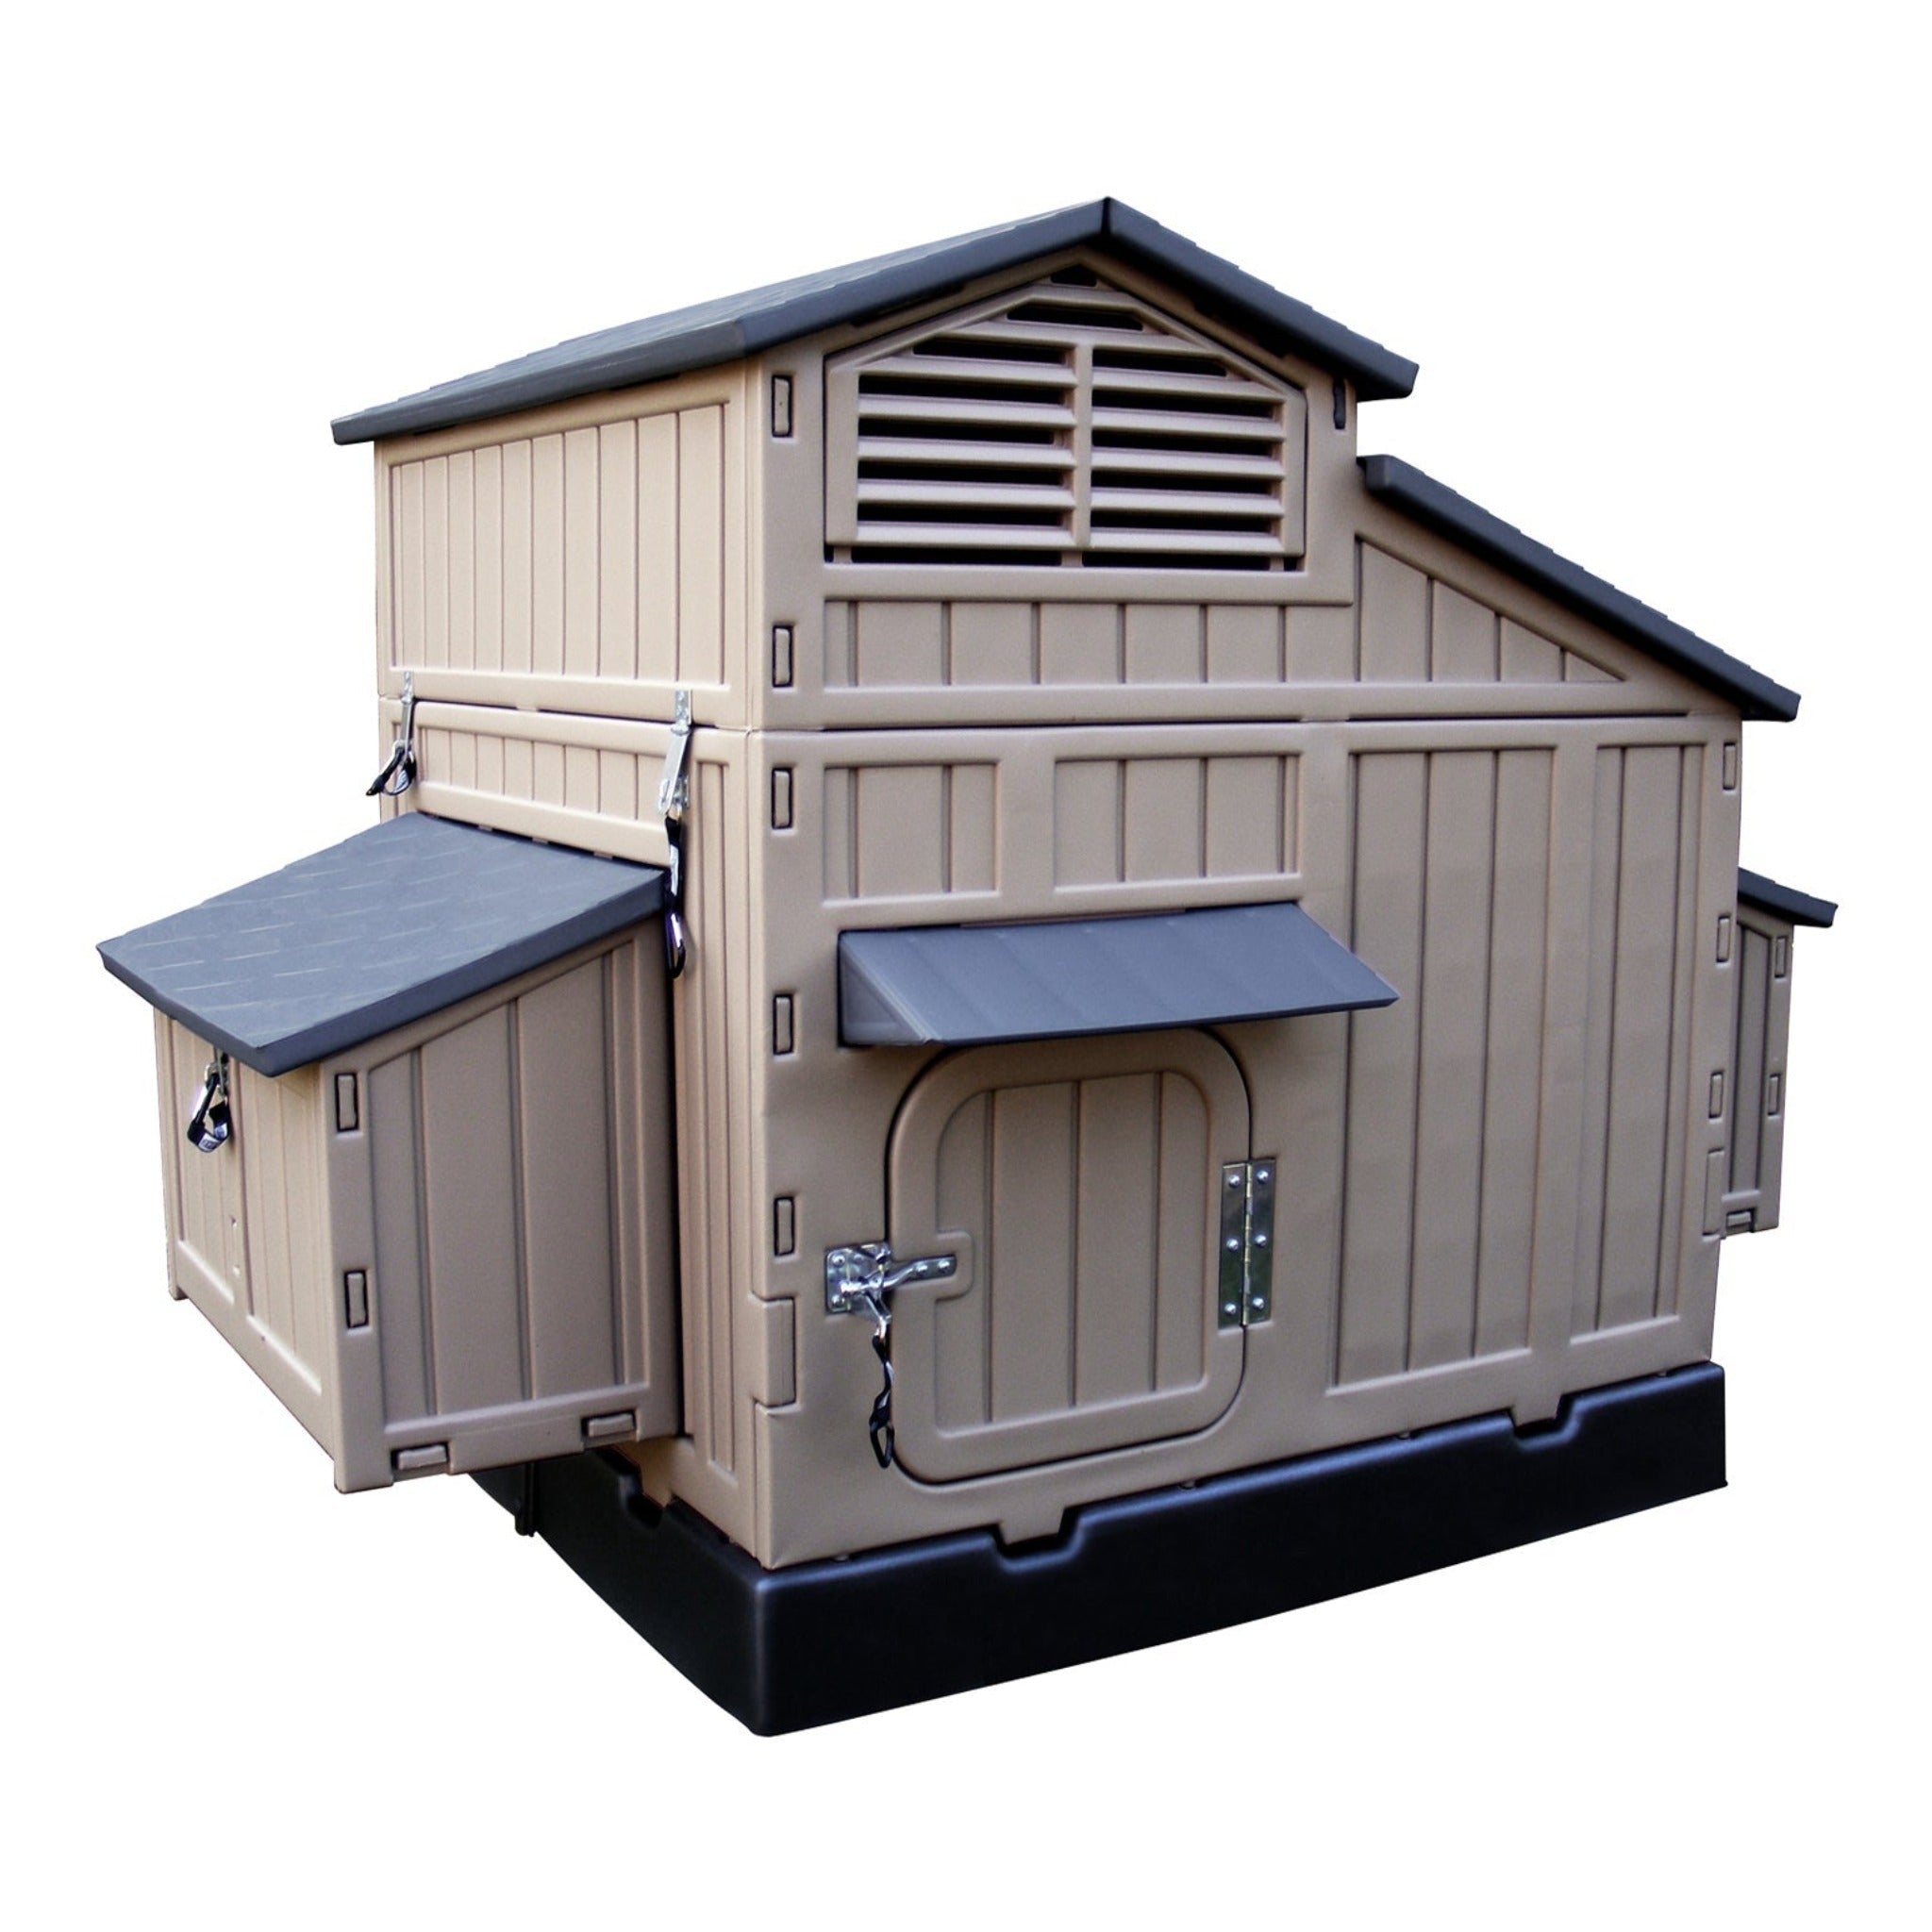 Hatching Time. Formex Large Chicken coop front view. Door with lock can be seen on front of coop.